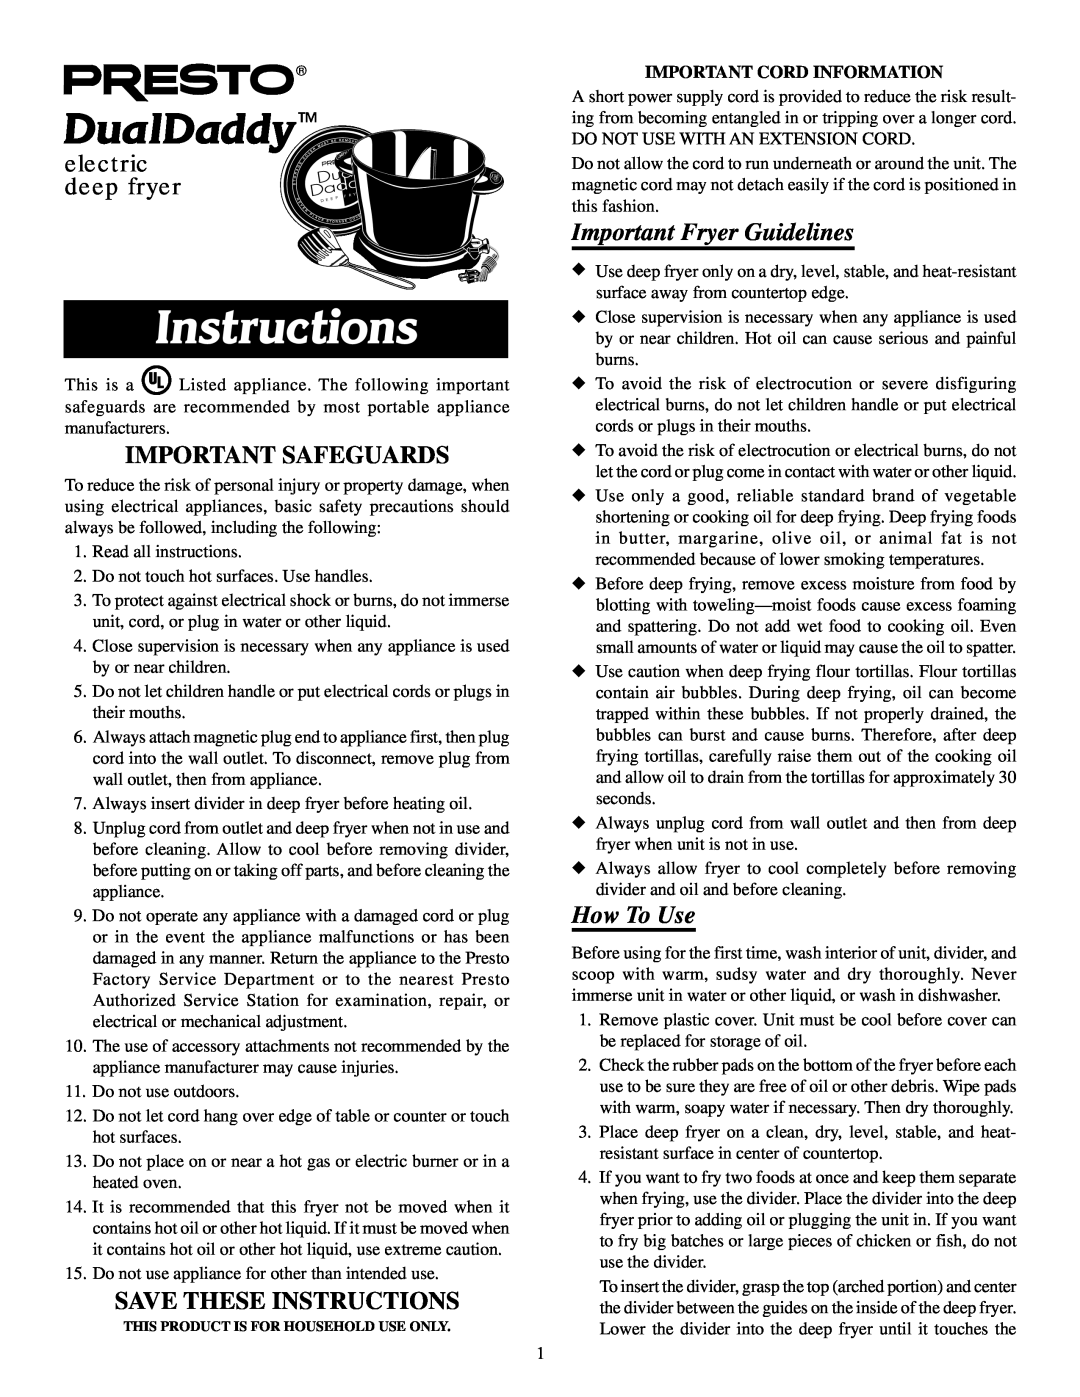 Presto electric deep fryer manual Important Fryer Guidelines, How To Use, Instructions, DualDaddy , Important Safeguards 